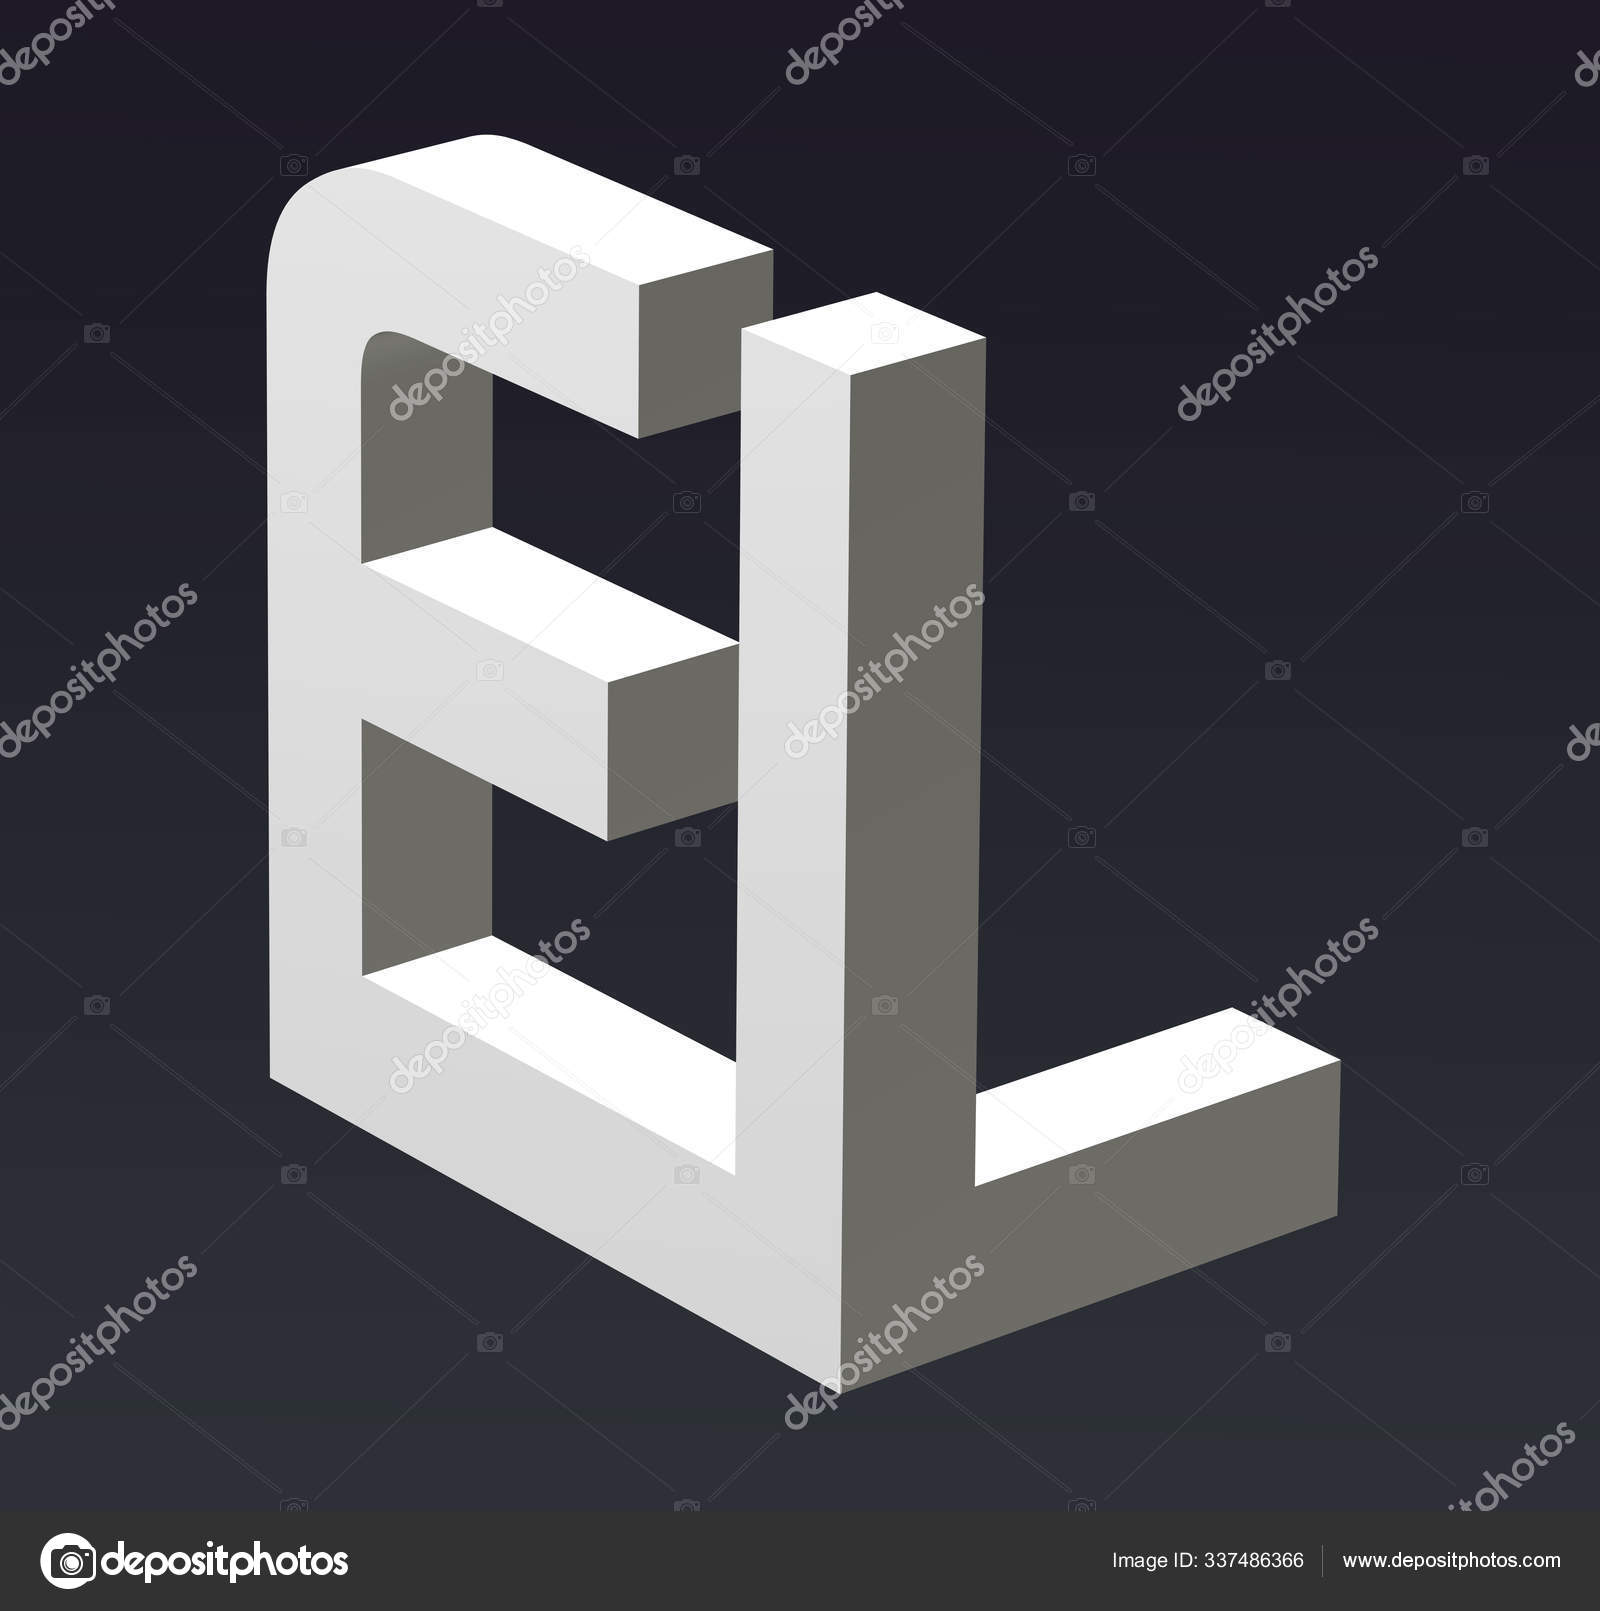 Font Stylization Letters Font Composition Logo Rendering Stock Photo Image By C 0123omar 337486366